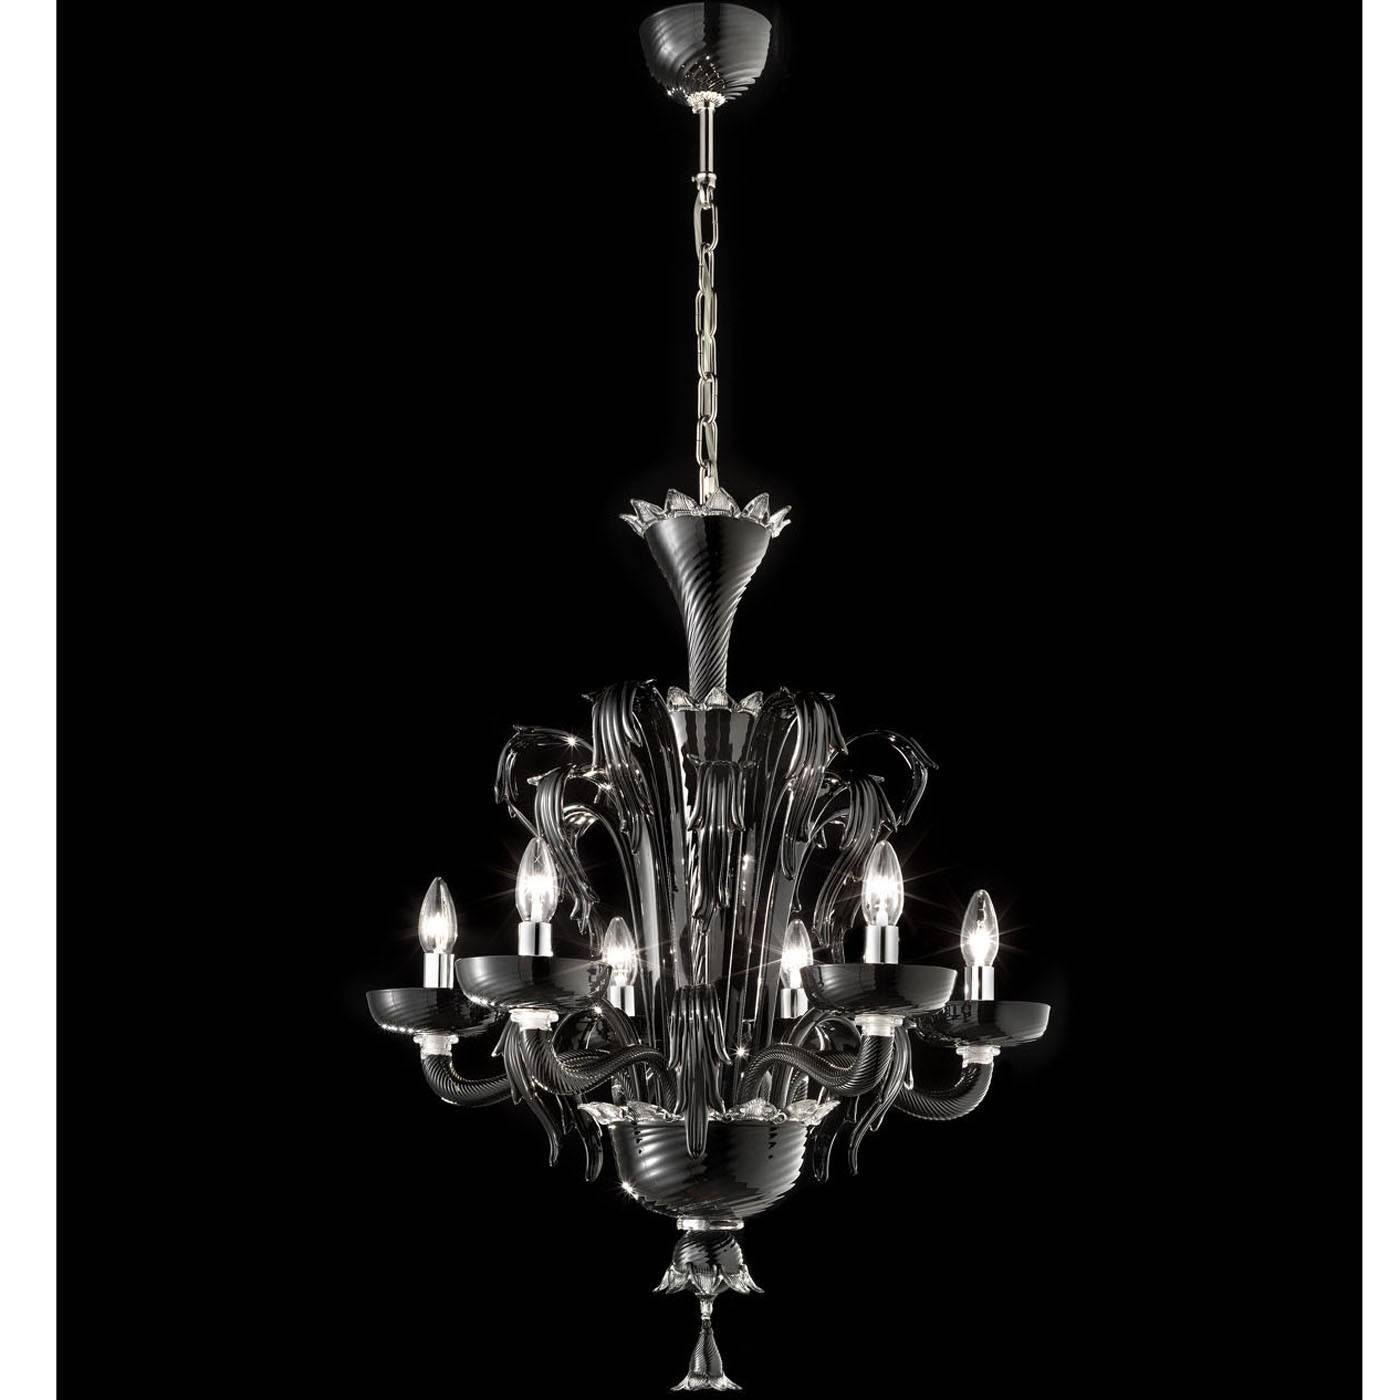 This six-light chandelier is handcrafted entirely in Murano glass in a black shade, and bares a striking and sinuous decoration on its top. Six majestic arms support the lights on its bottom. This piece has an elegant and Classic style.